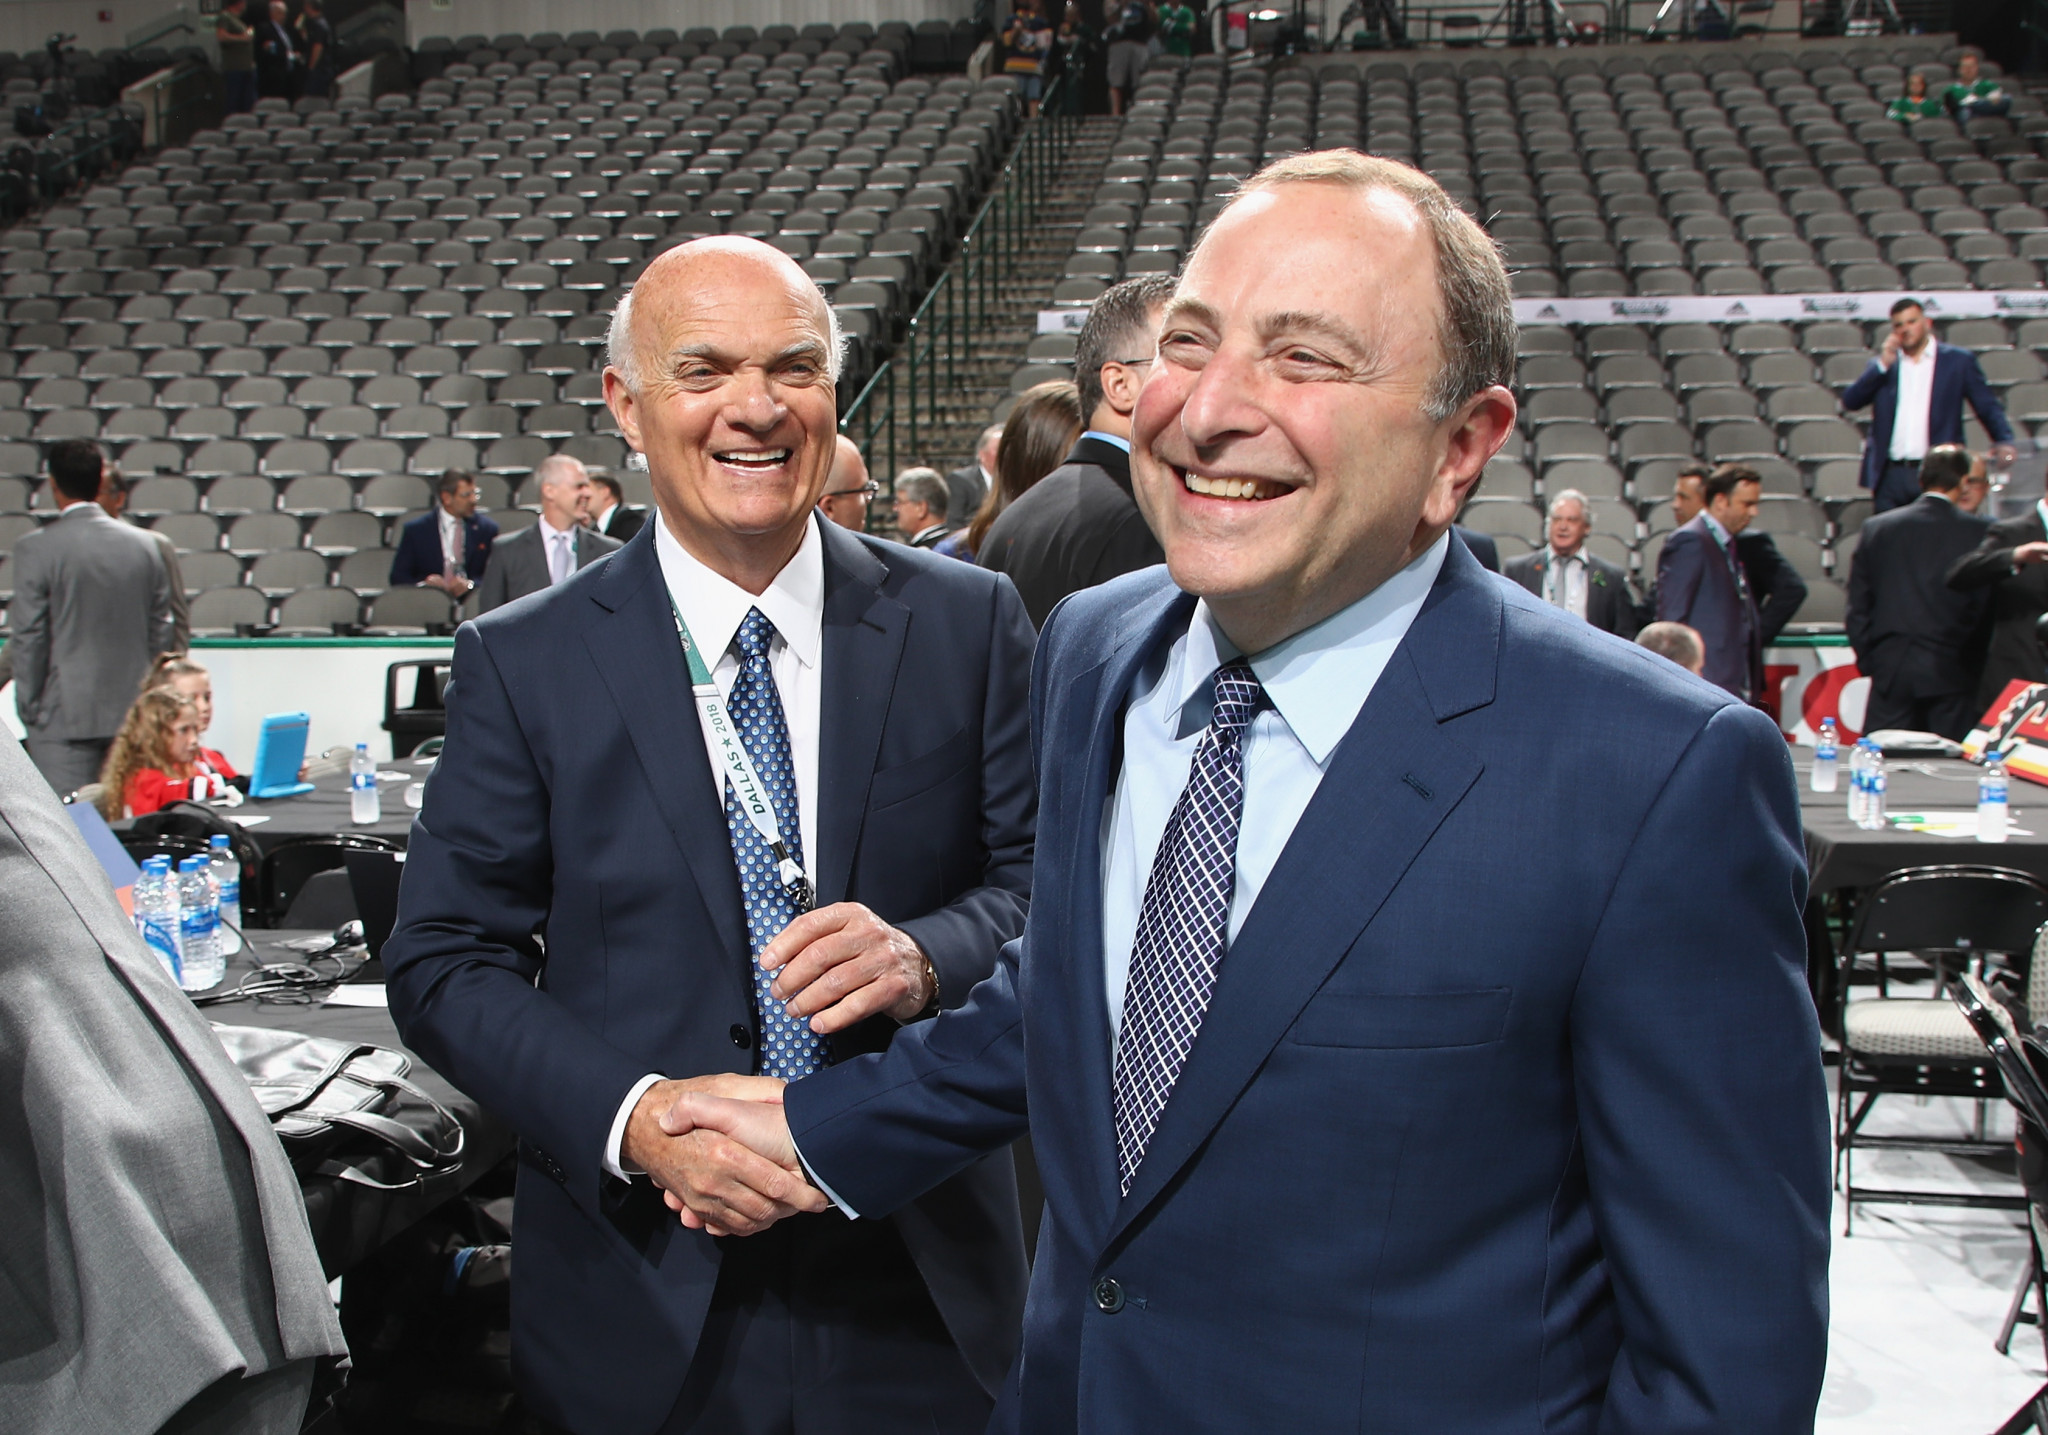 NHL Commissioner Gary Bettman, right, has claimed ice hockey's growth in China is not be dependent on the League participating at the 2022 Winter Olympic Games in Beijing ©Getty Images